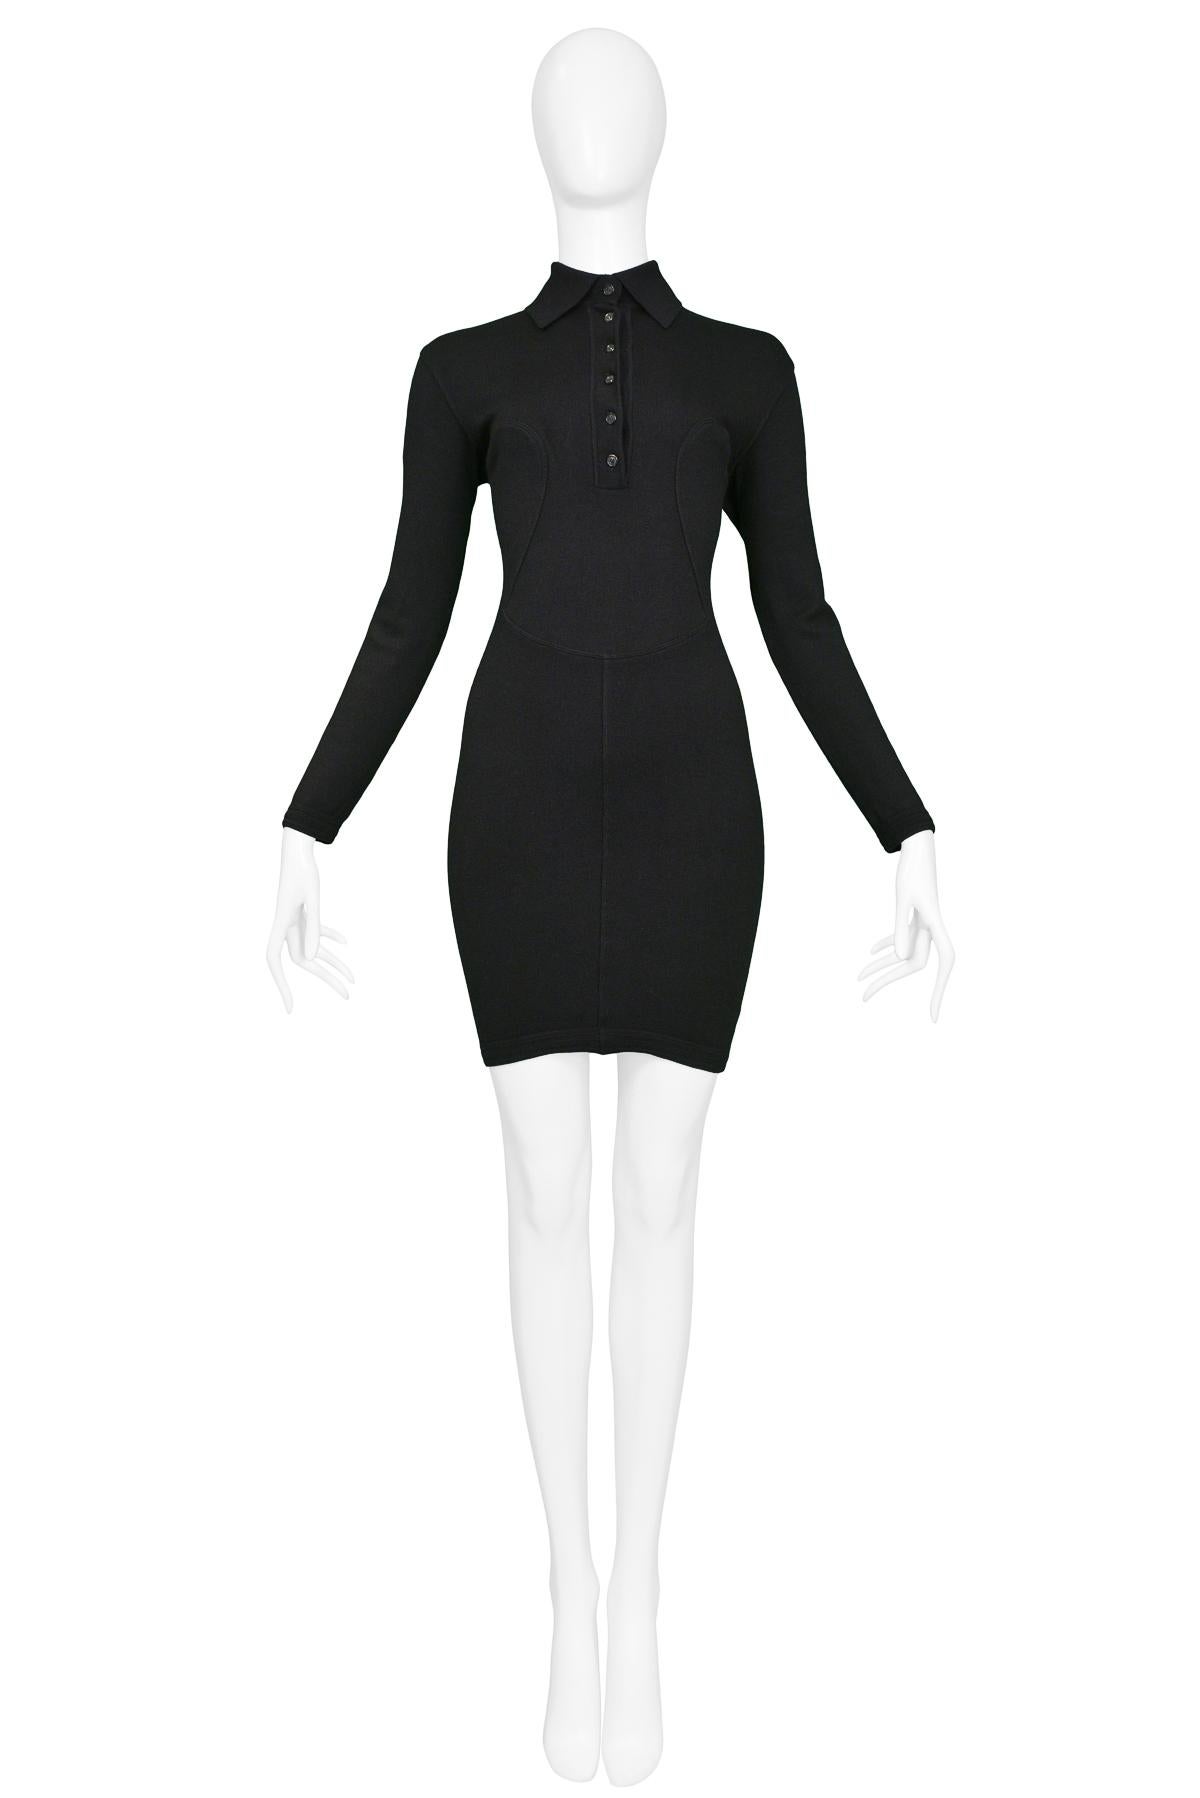 Vintage Azzedine Alaia long sleeve black stretch knit bodycon dress featuring a collar & button neckline and panel stitch work at the torso and skirt. Autumn/Winter 1991 Collection.

Excellent Condition.

Size: Medium